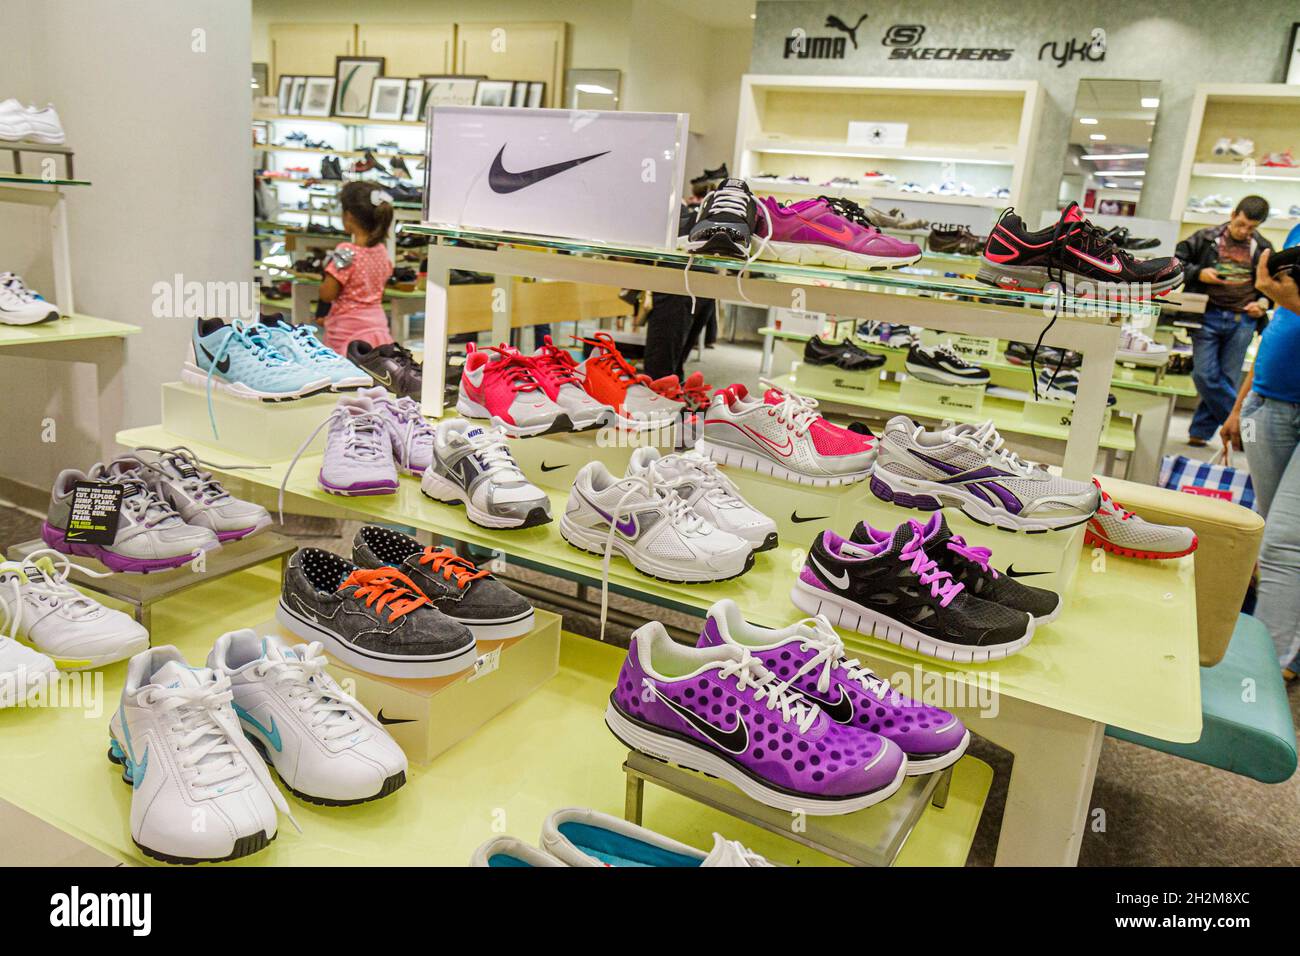 Miami Florida,Dadeland Mall,Macy's Department Store inside interior,selling  retail display sale shoes footwear Nike logo Stock Photo - Alamy